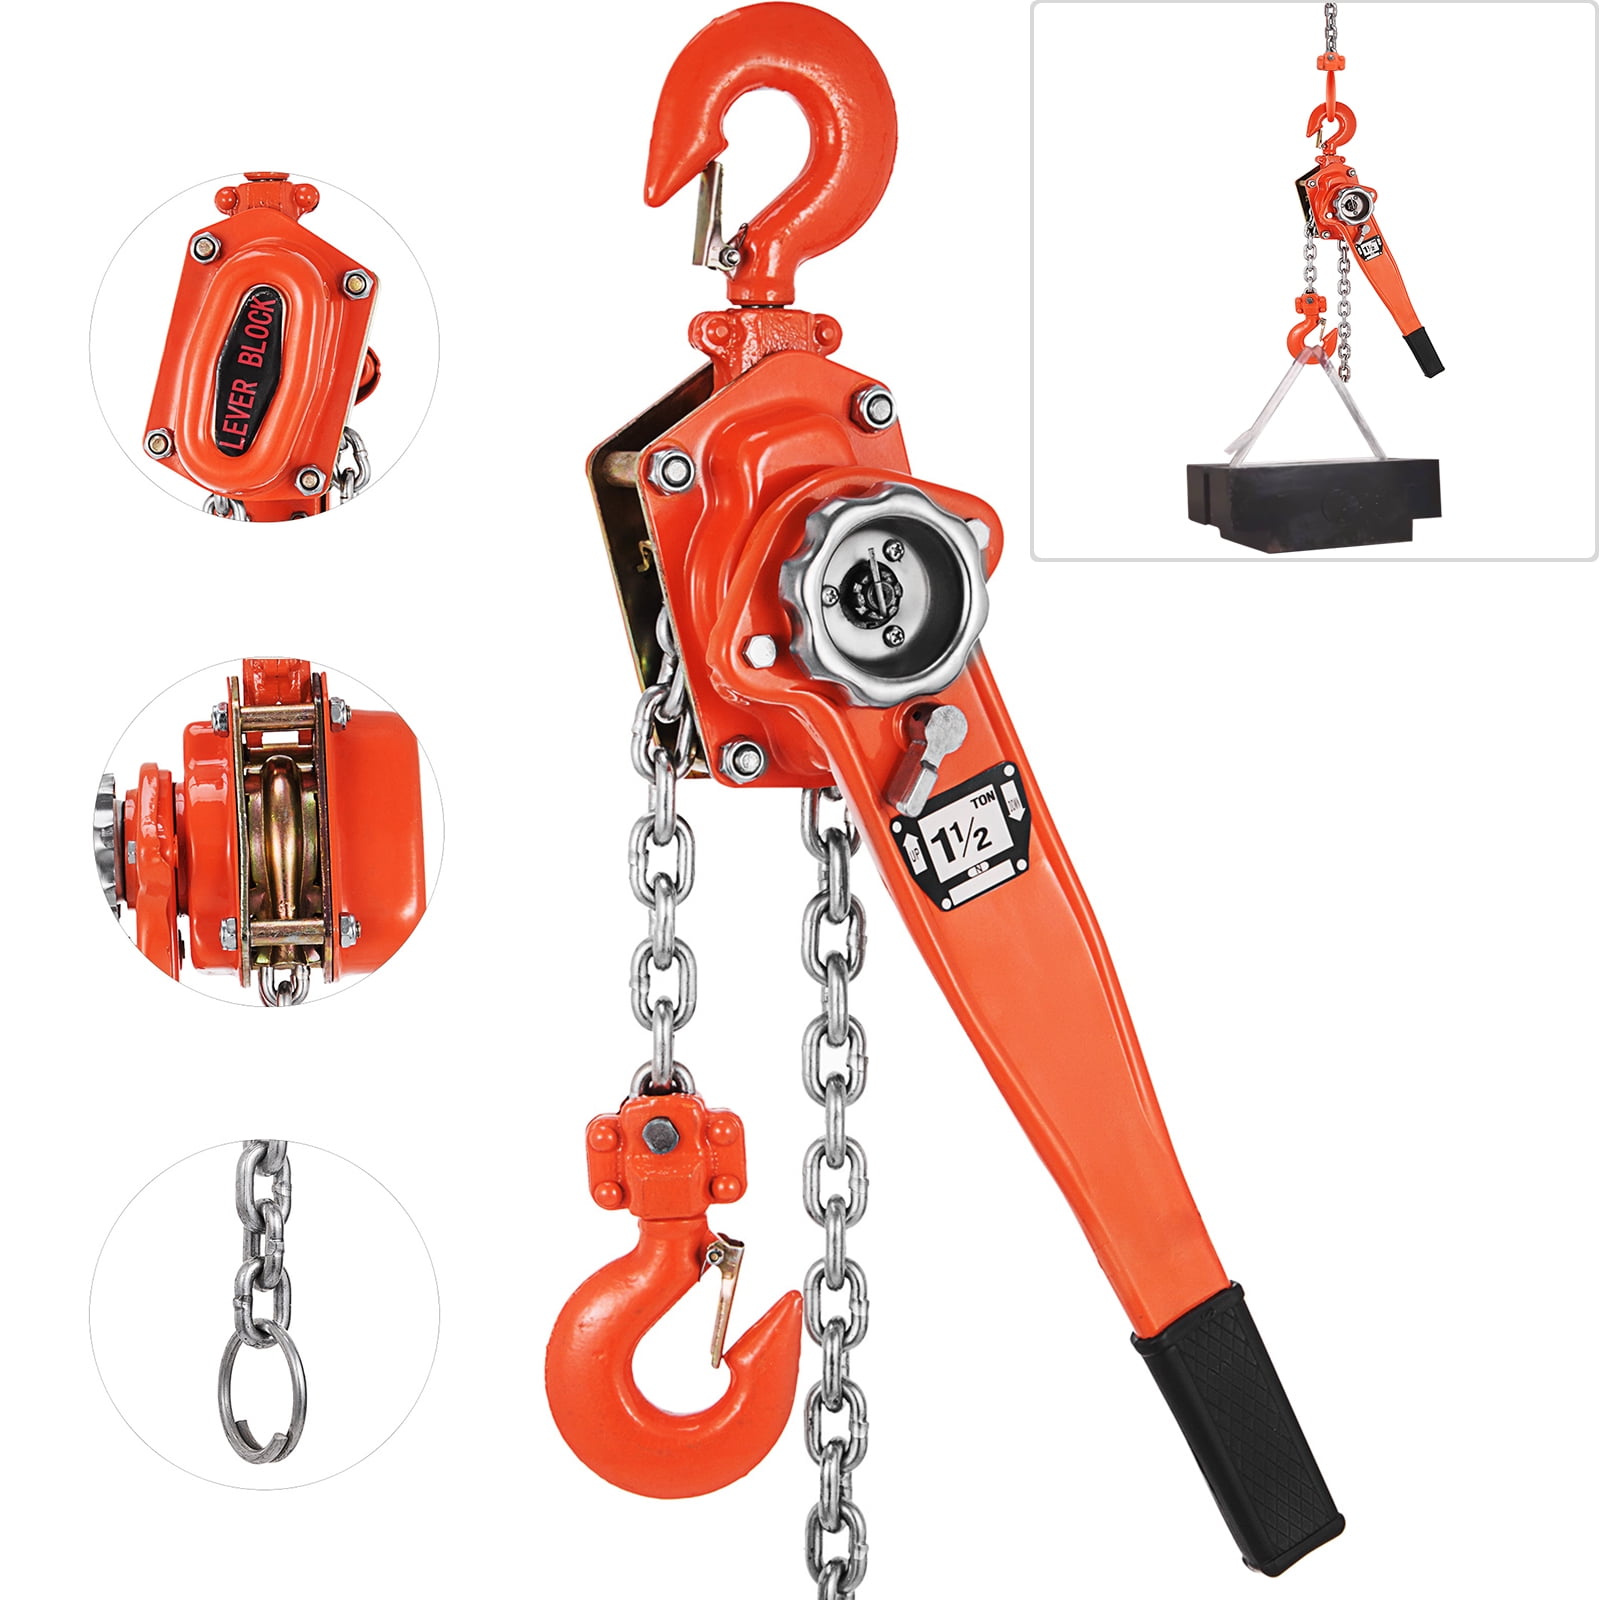 1.5 TON EASY USE LEVER BLOCK CHAIN HOIST RATCHET TYPE COMEALONG PULLER LIFTER 